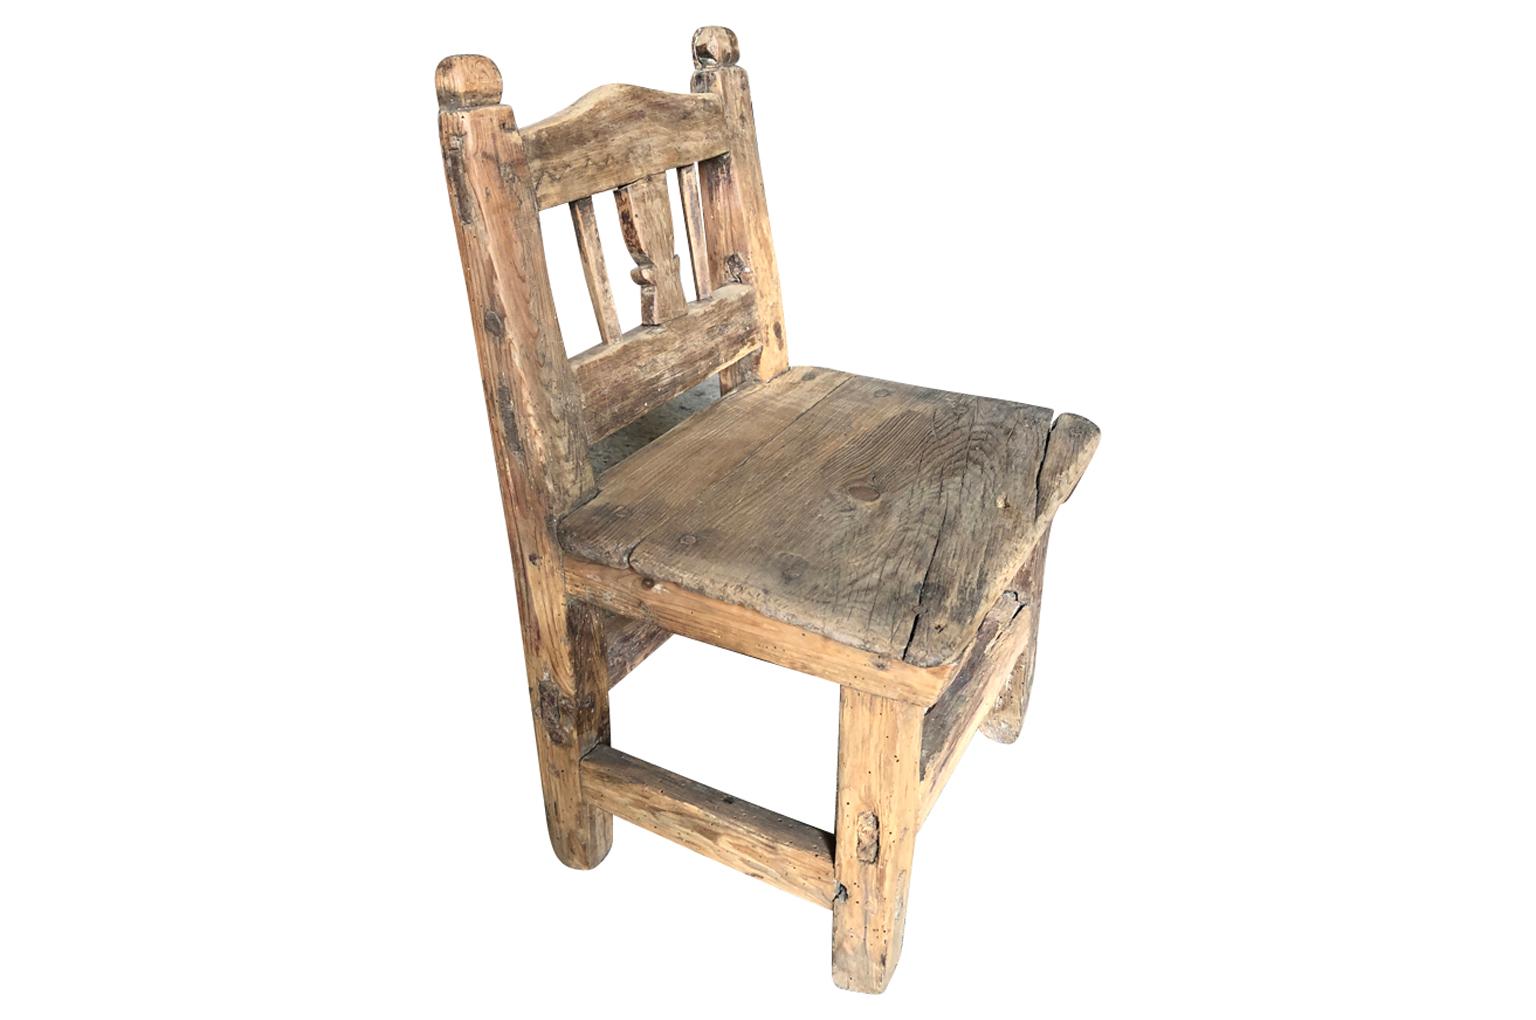 A very charming early 19th century Child's chair from Spain. Soundly constructed from Meleze wood - a very dense pine. A delightful Primitive piece with beautiful carving detail.